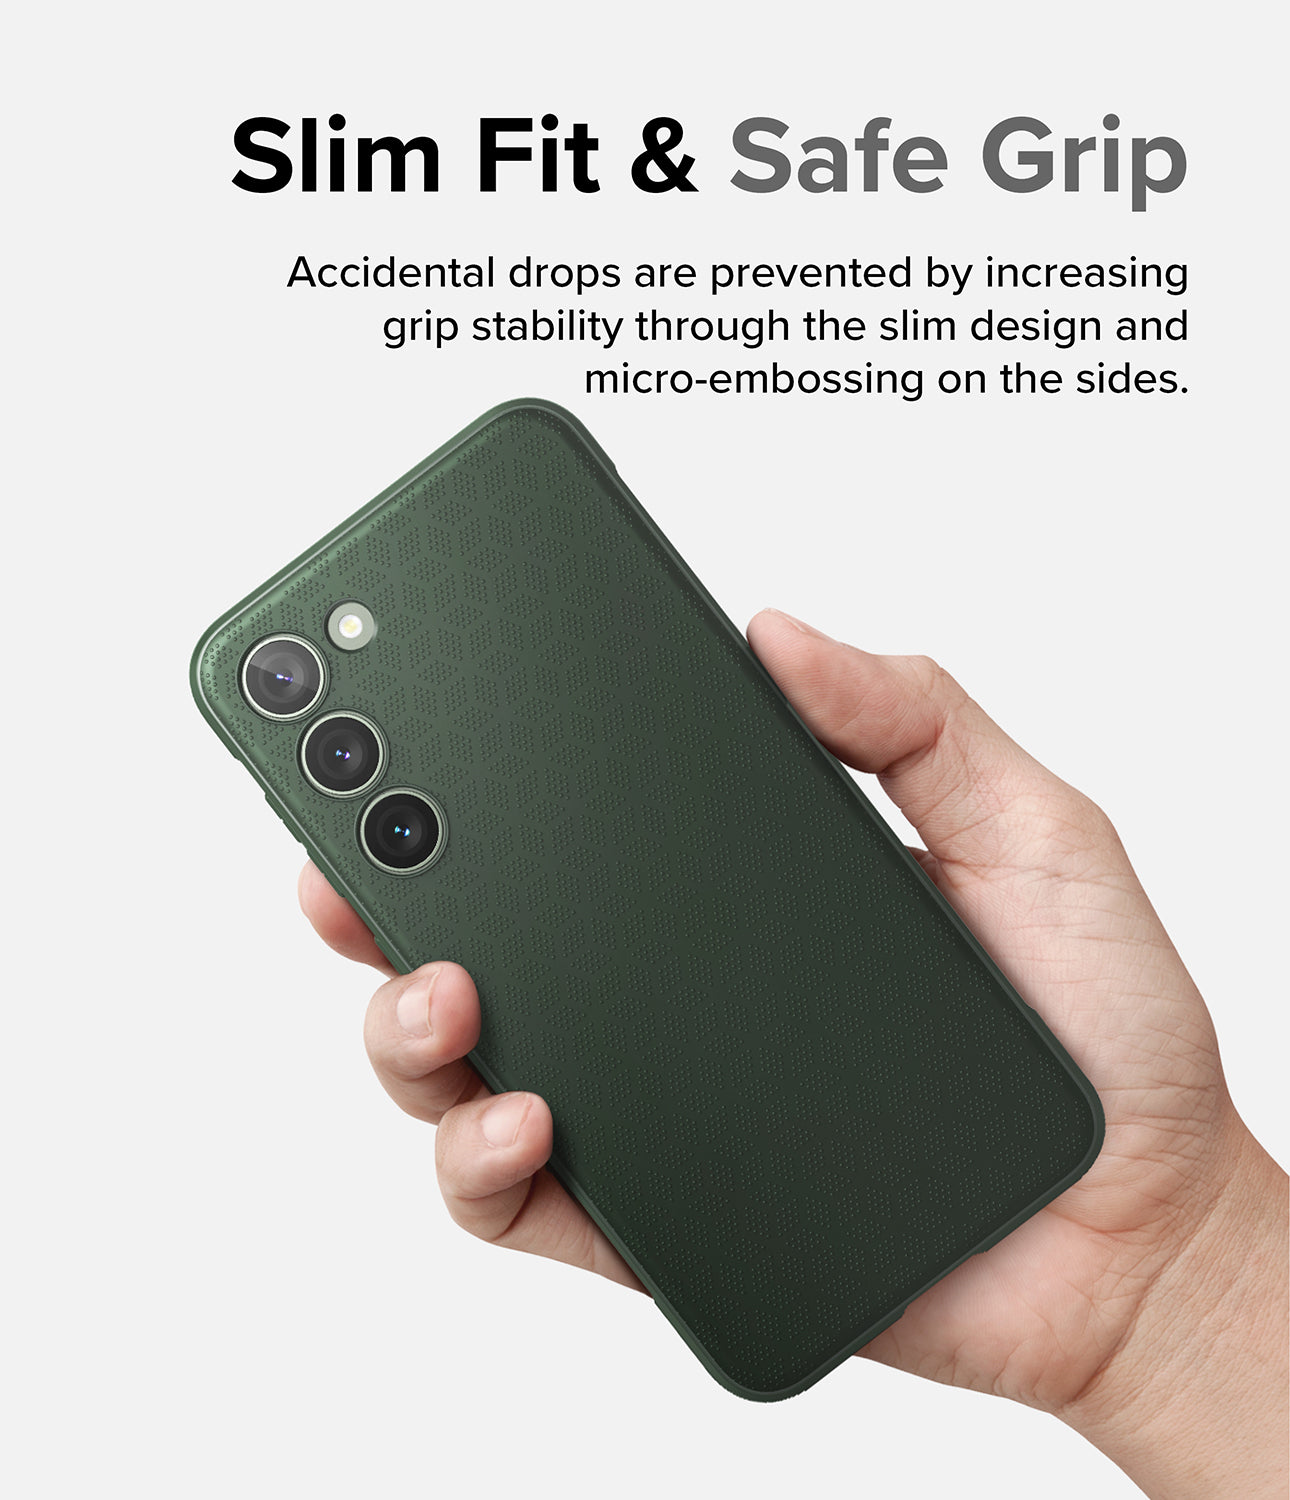 Galaxy S23 Plus Case | Onyx Dark Green - Slim Fit and Safe Grip. Accidental drops are prevented by increasing grip stability through the slim design and micro-embossing on the sides.